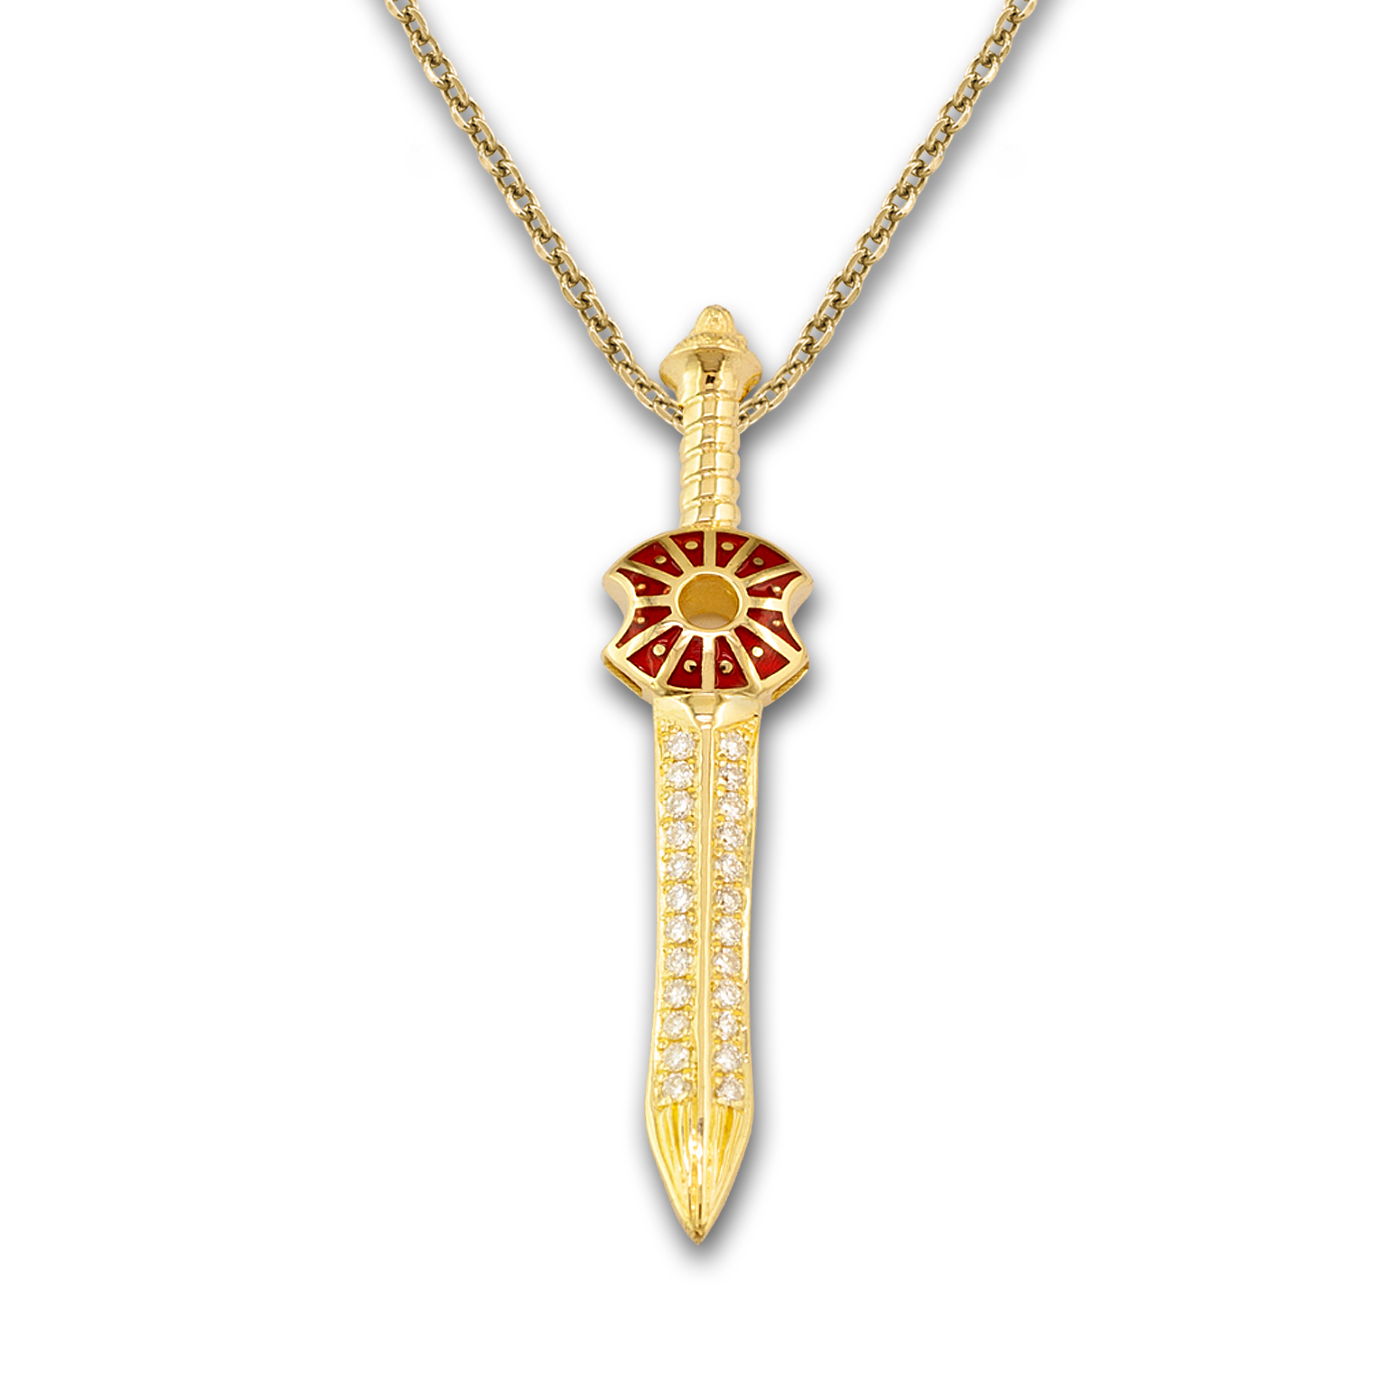 Ares Sword & Shield Gold Pendant with diamonds and enamel